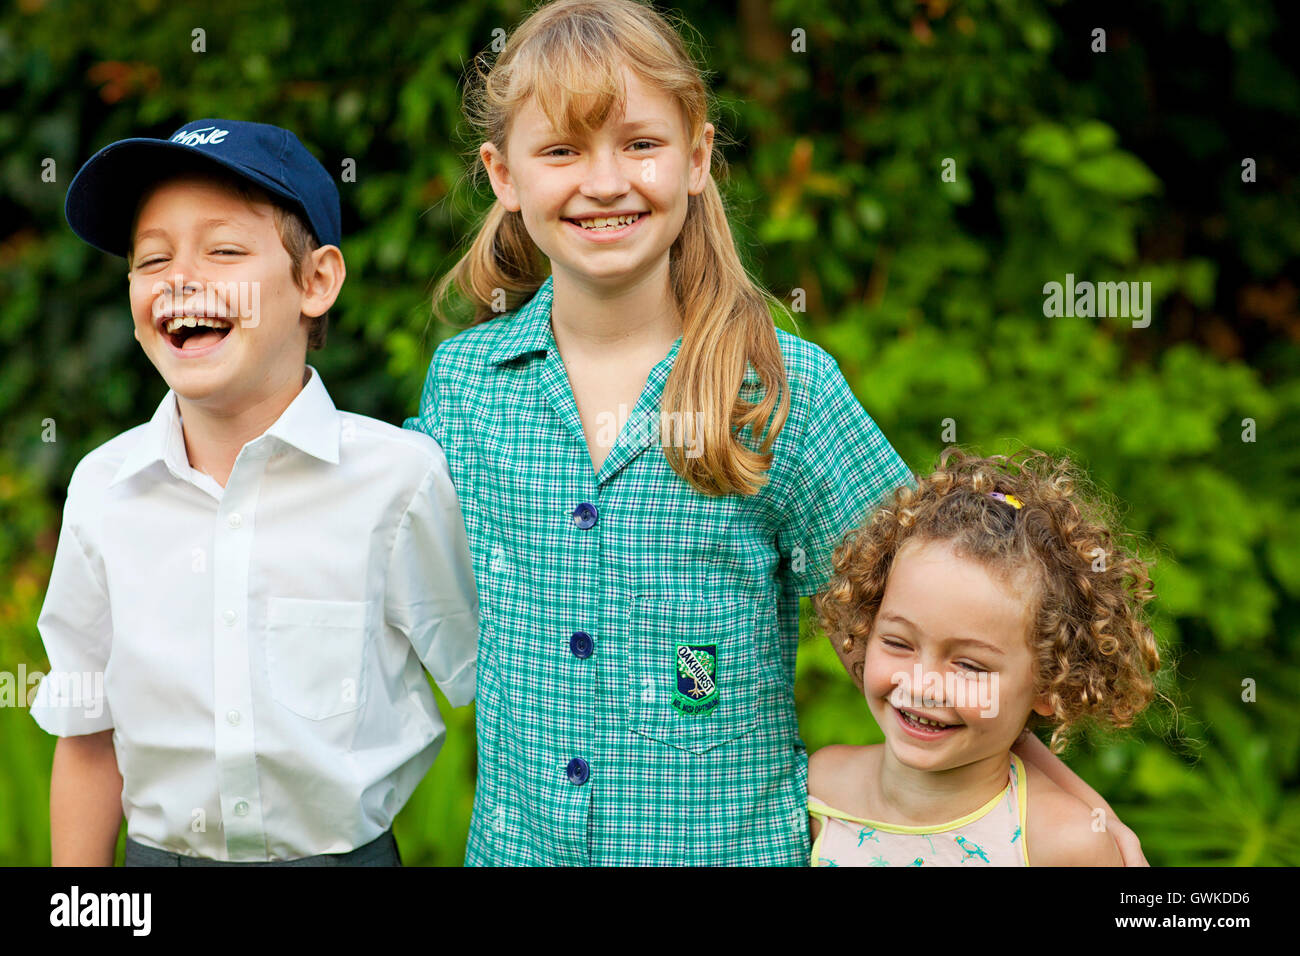 Three smiling and laughing school children Stock Photo